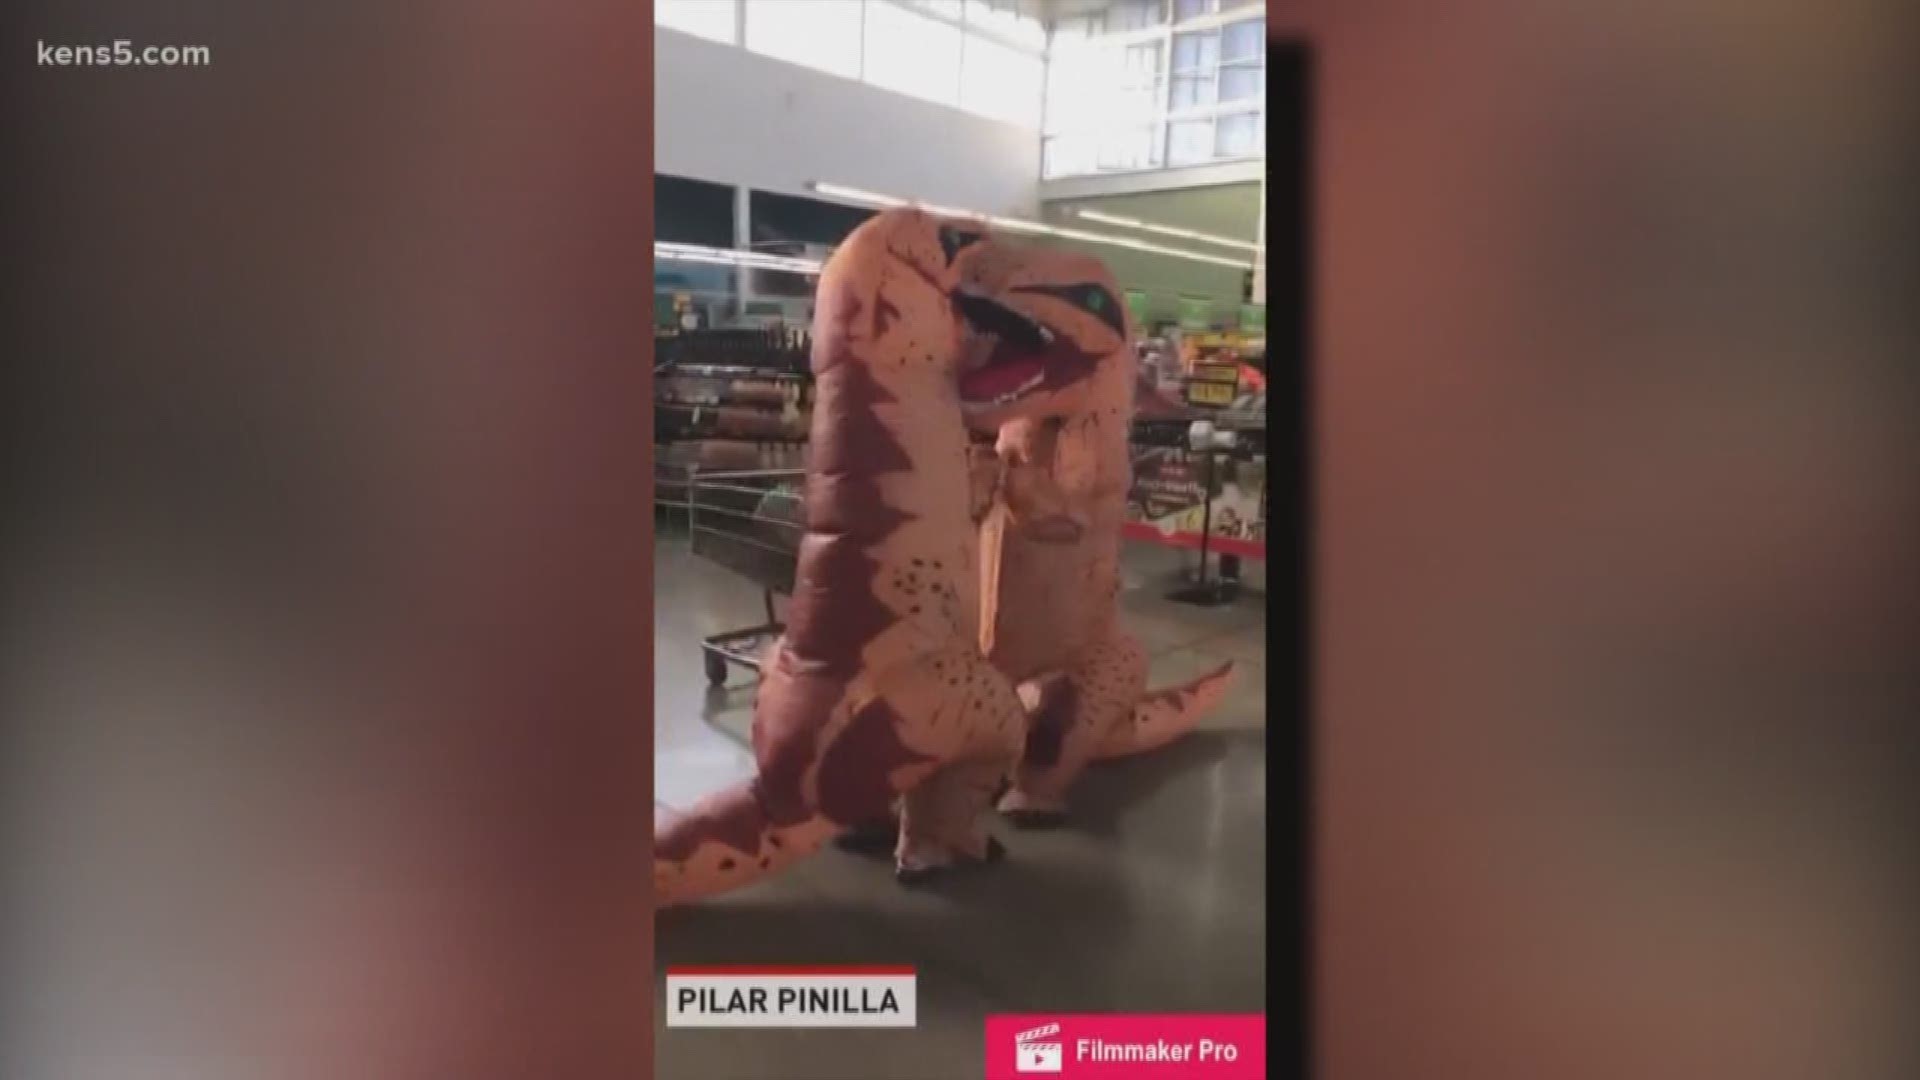 While long lines and empty shelves led to some stressed-out customers, a mariachi band and pair of dinosaurs decided to help lighten the mood at H-E-B.